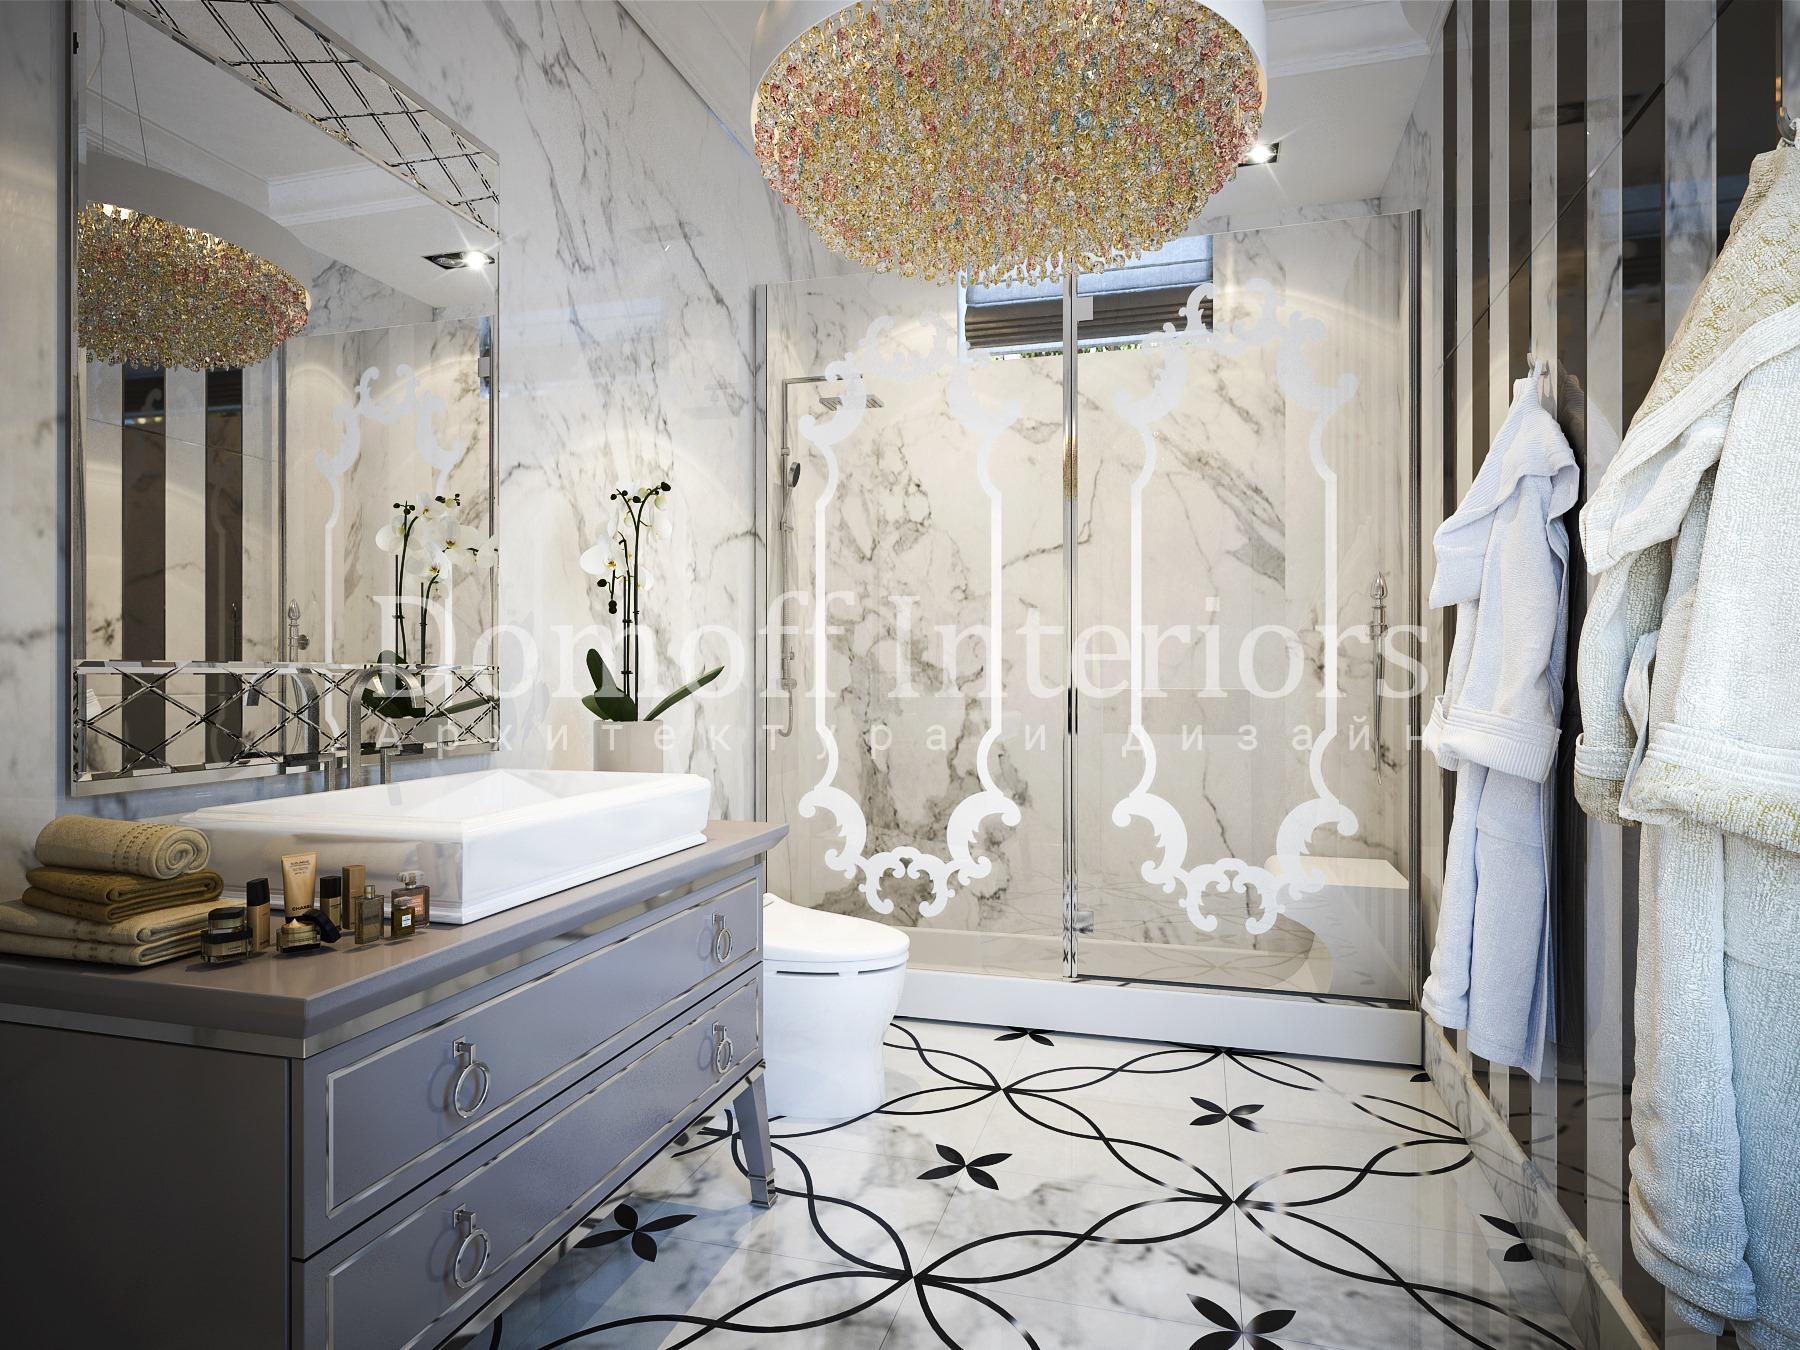 Ground floor bathroom made in the style of Contemporary classics